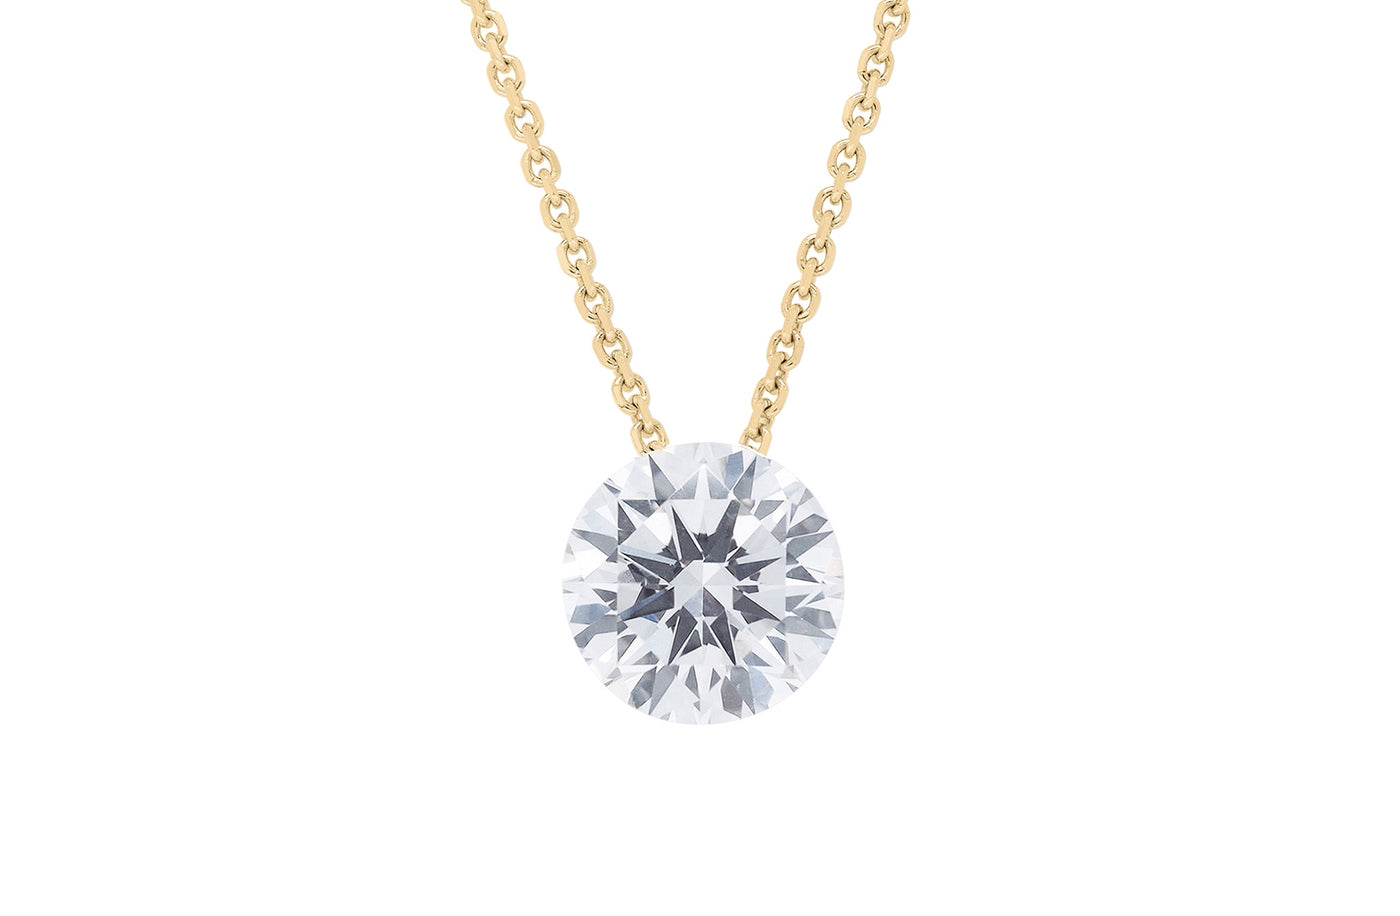 The Floeting® Diamond Pendant in Yellow Gold | 1.62ct H VS1